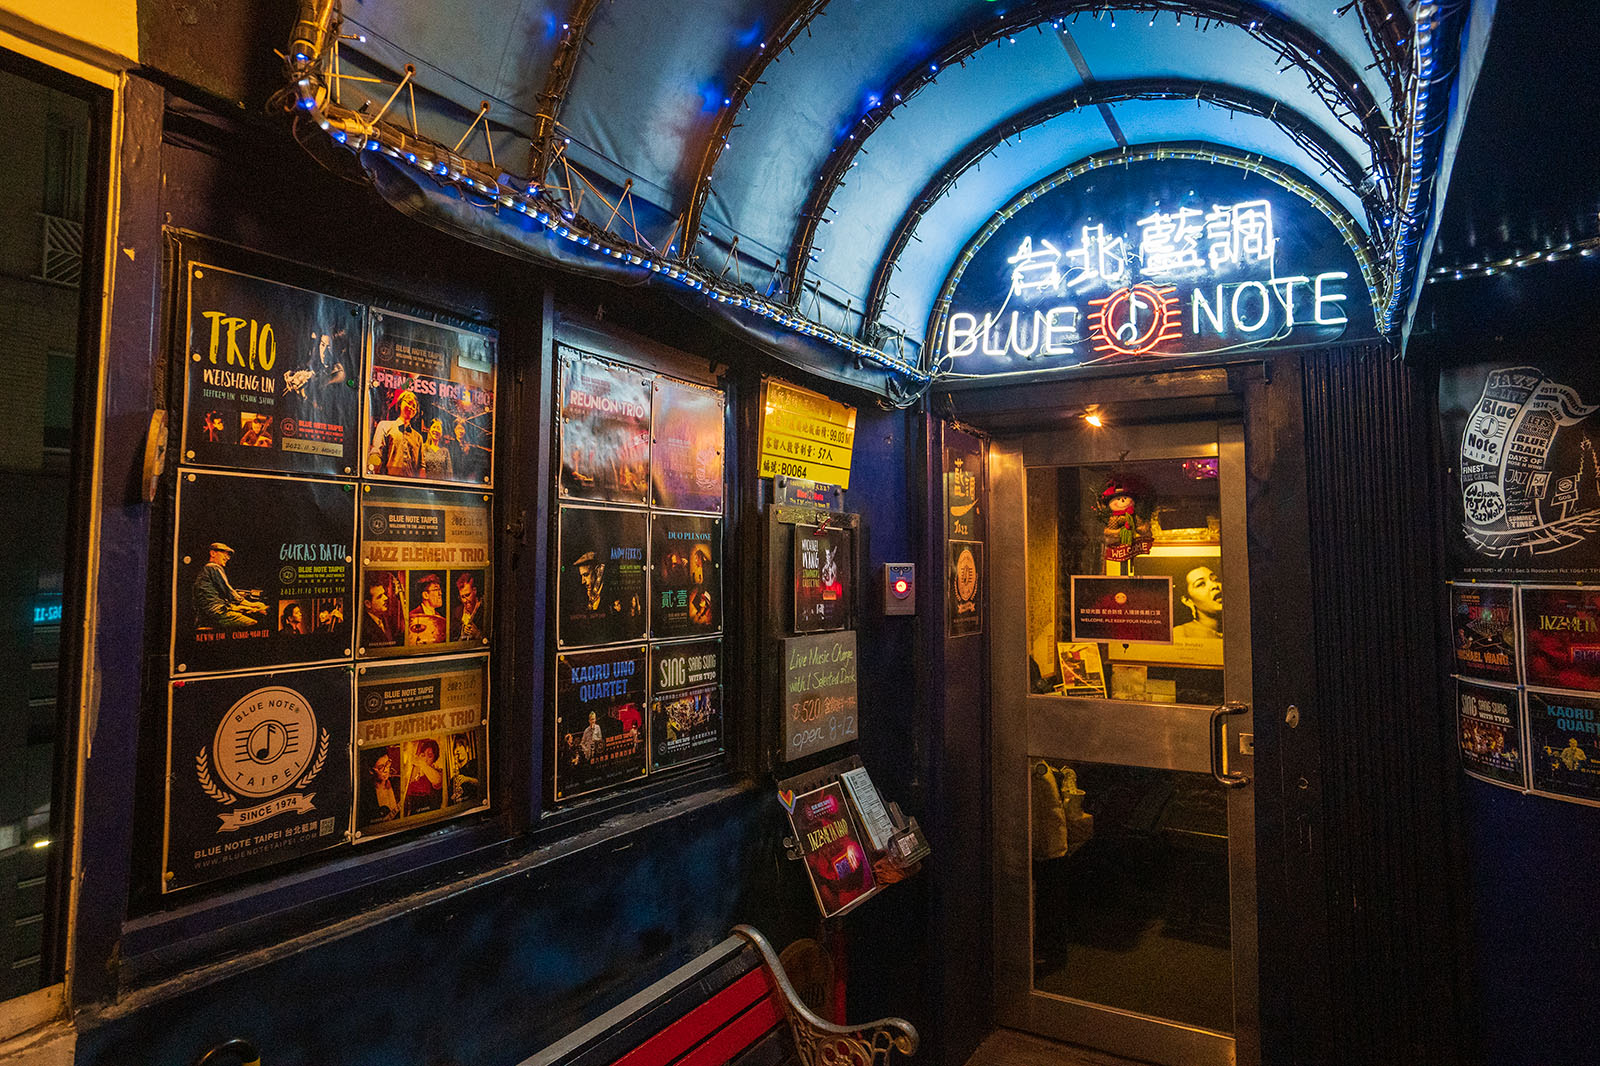 The entrance to Taipei's premier jazz club Blue Note is rather low key.